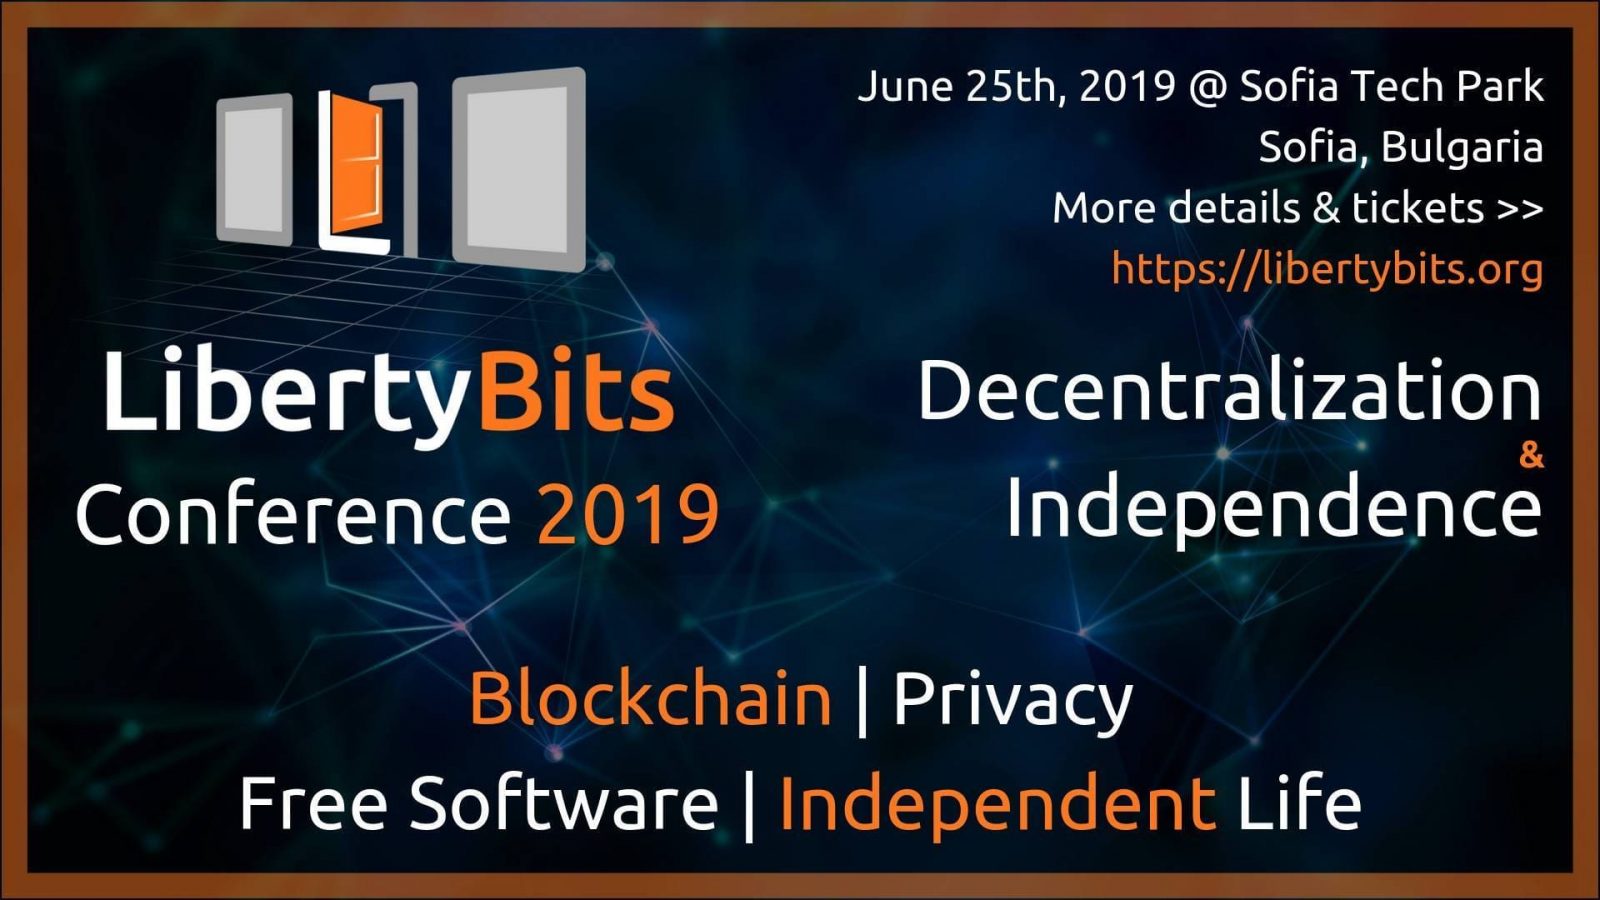 LibertyBits Conference 2019